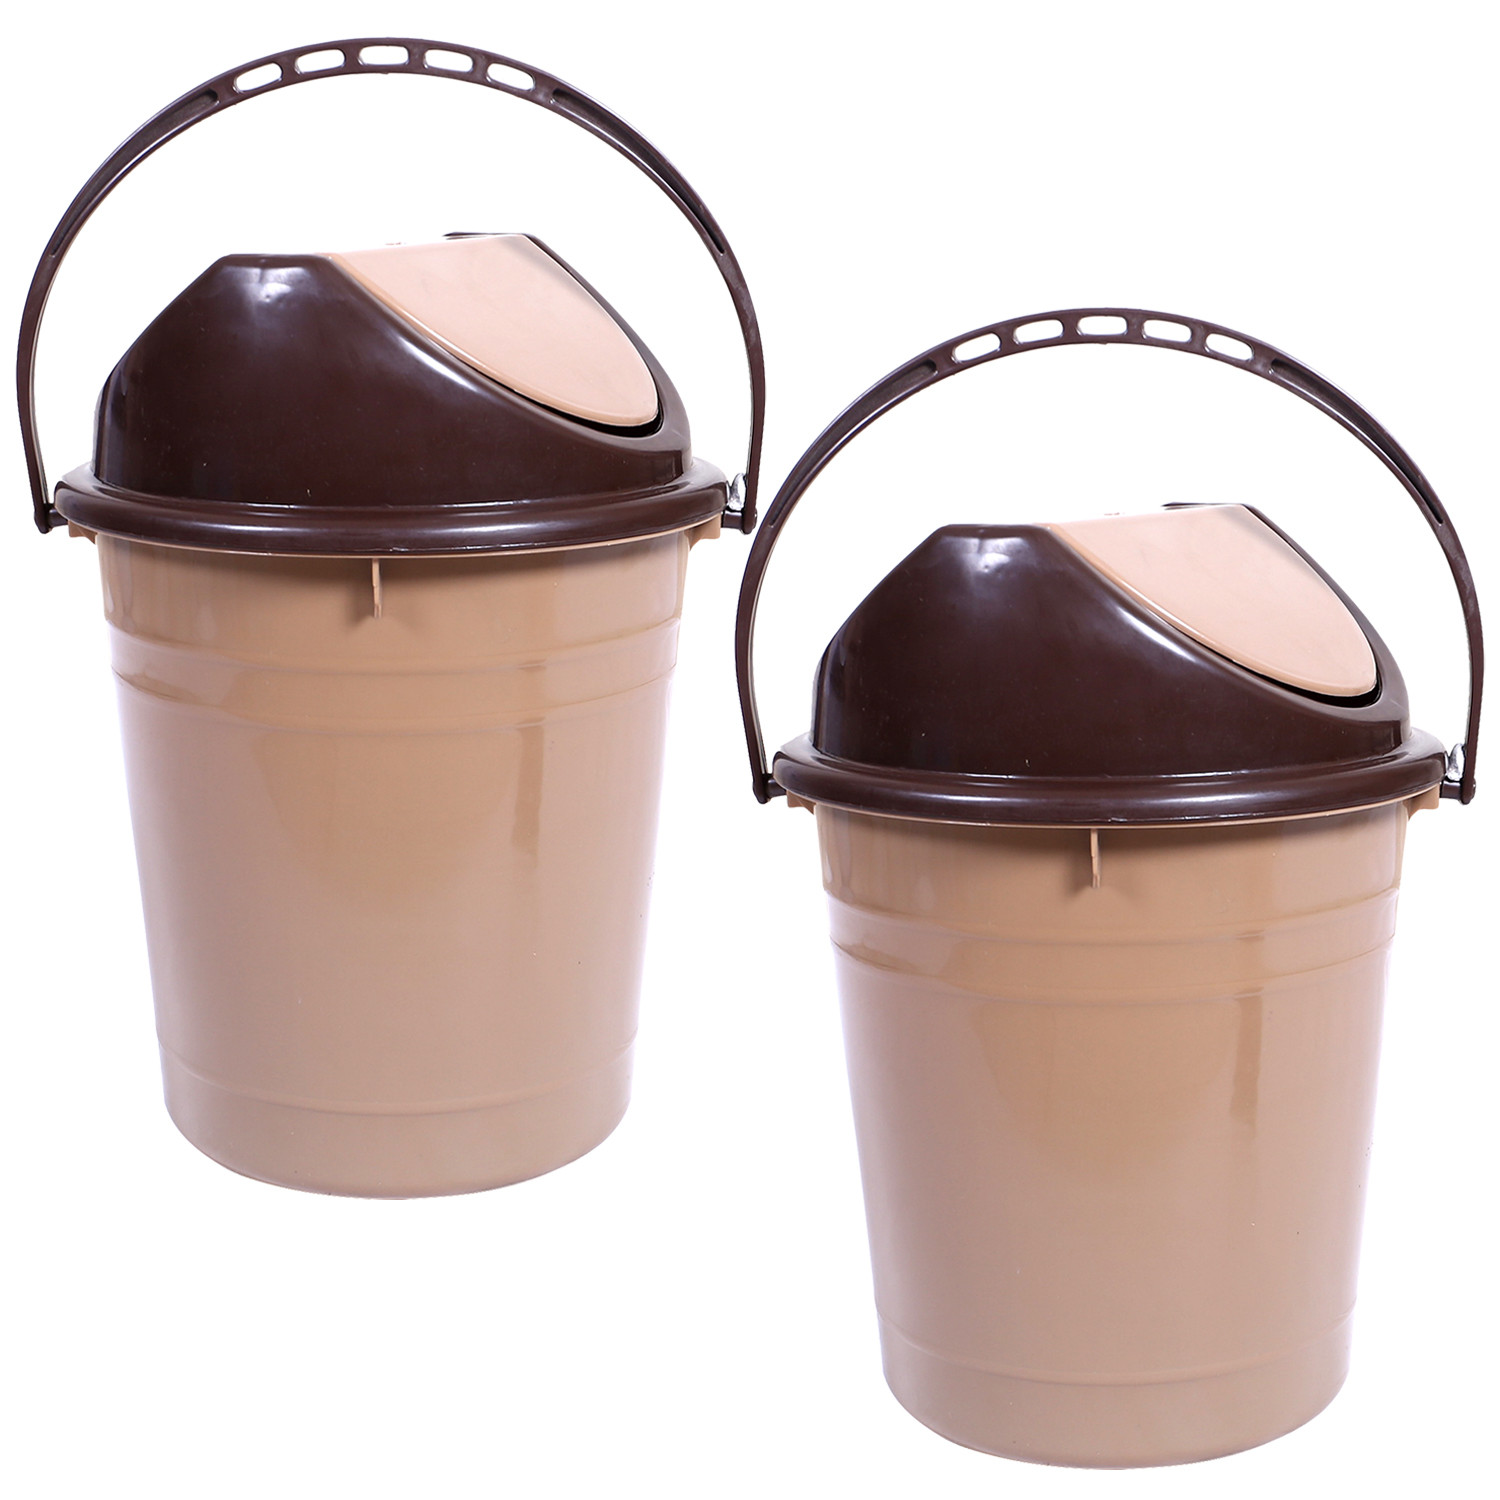 Kuber Industries Plastic Dustbin with Swinging Lid|Portable Garbage Basket & Round Trash Can for Home,Kitchen,Office,College,10 Ltr (Coffee)